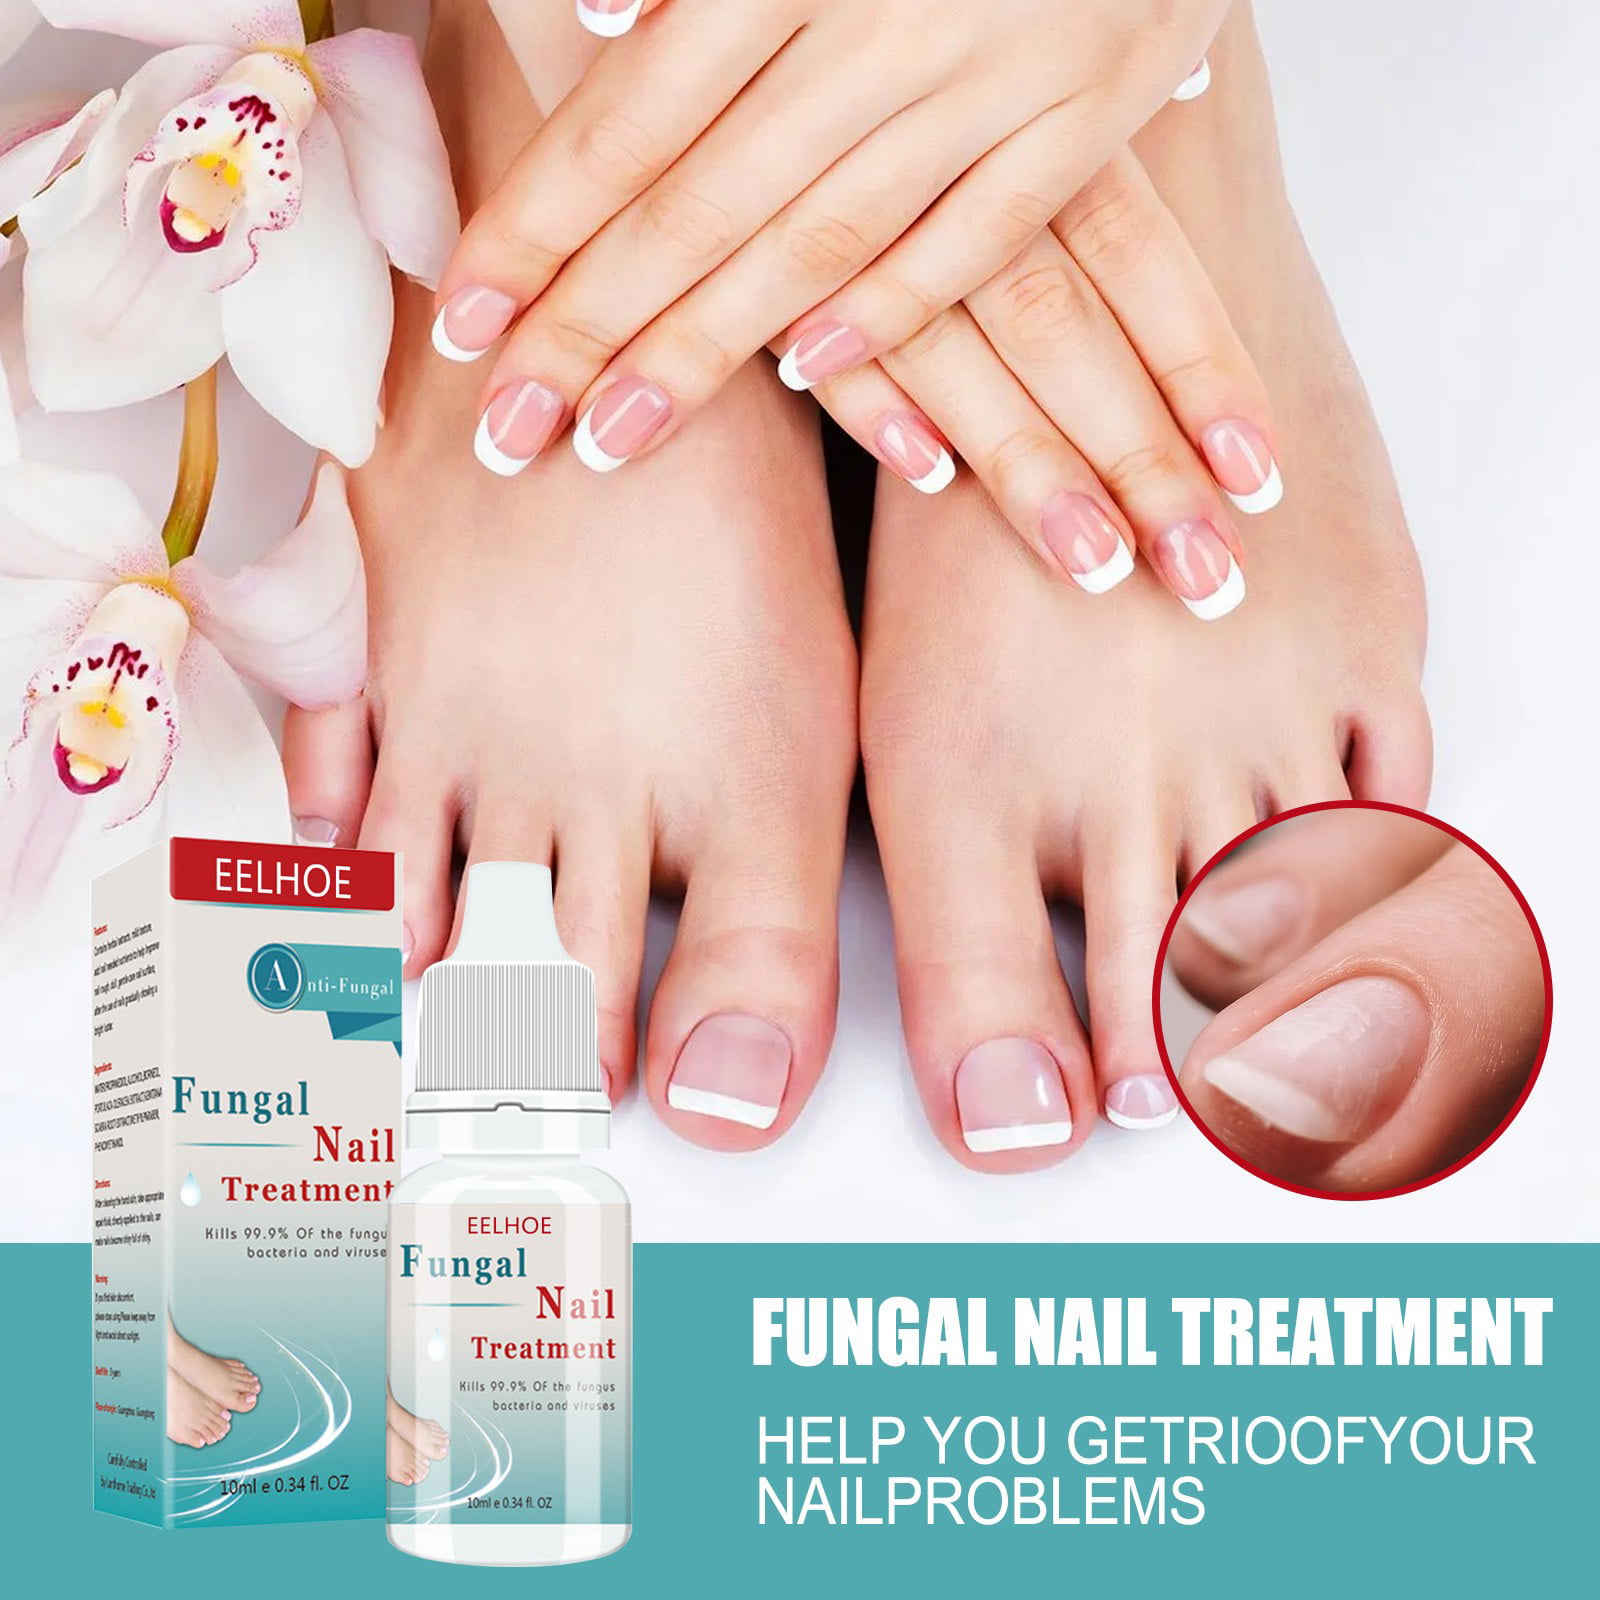 Common nail discoloration | First Derm